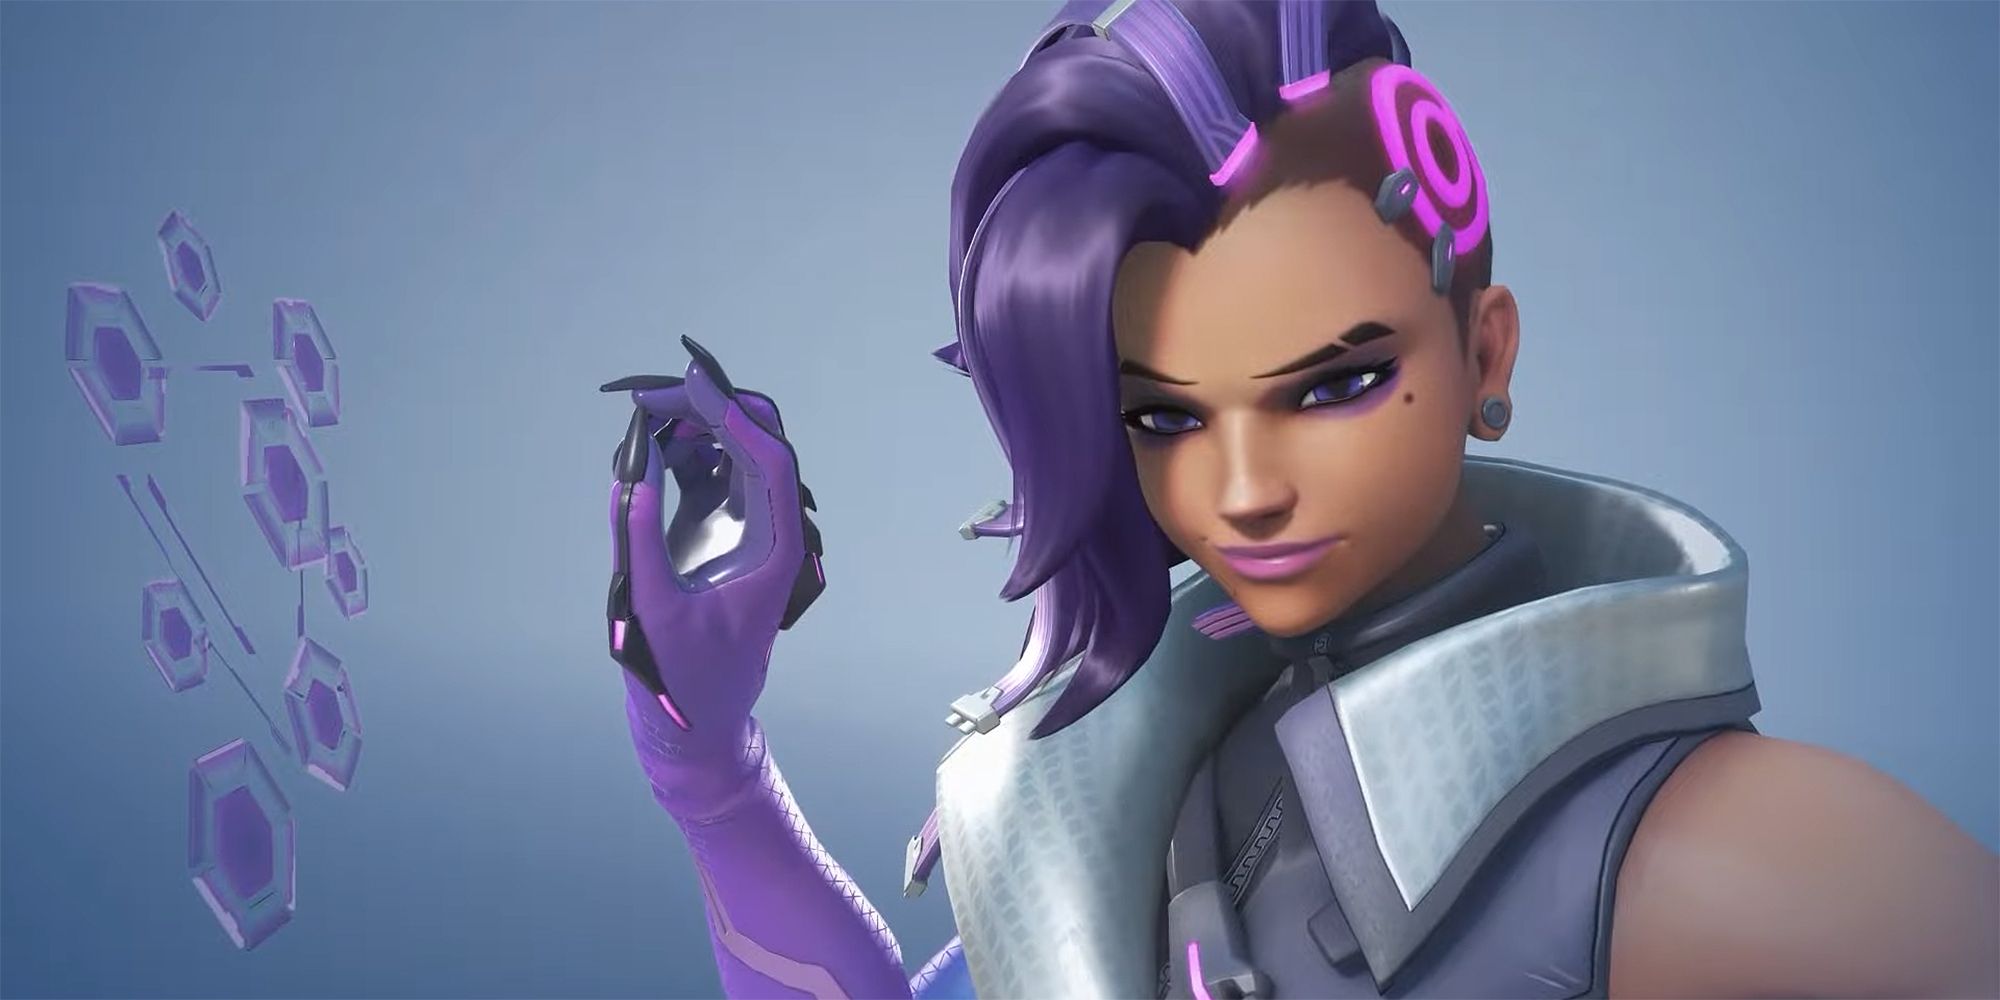 sombra hacking in her highlight intro